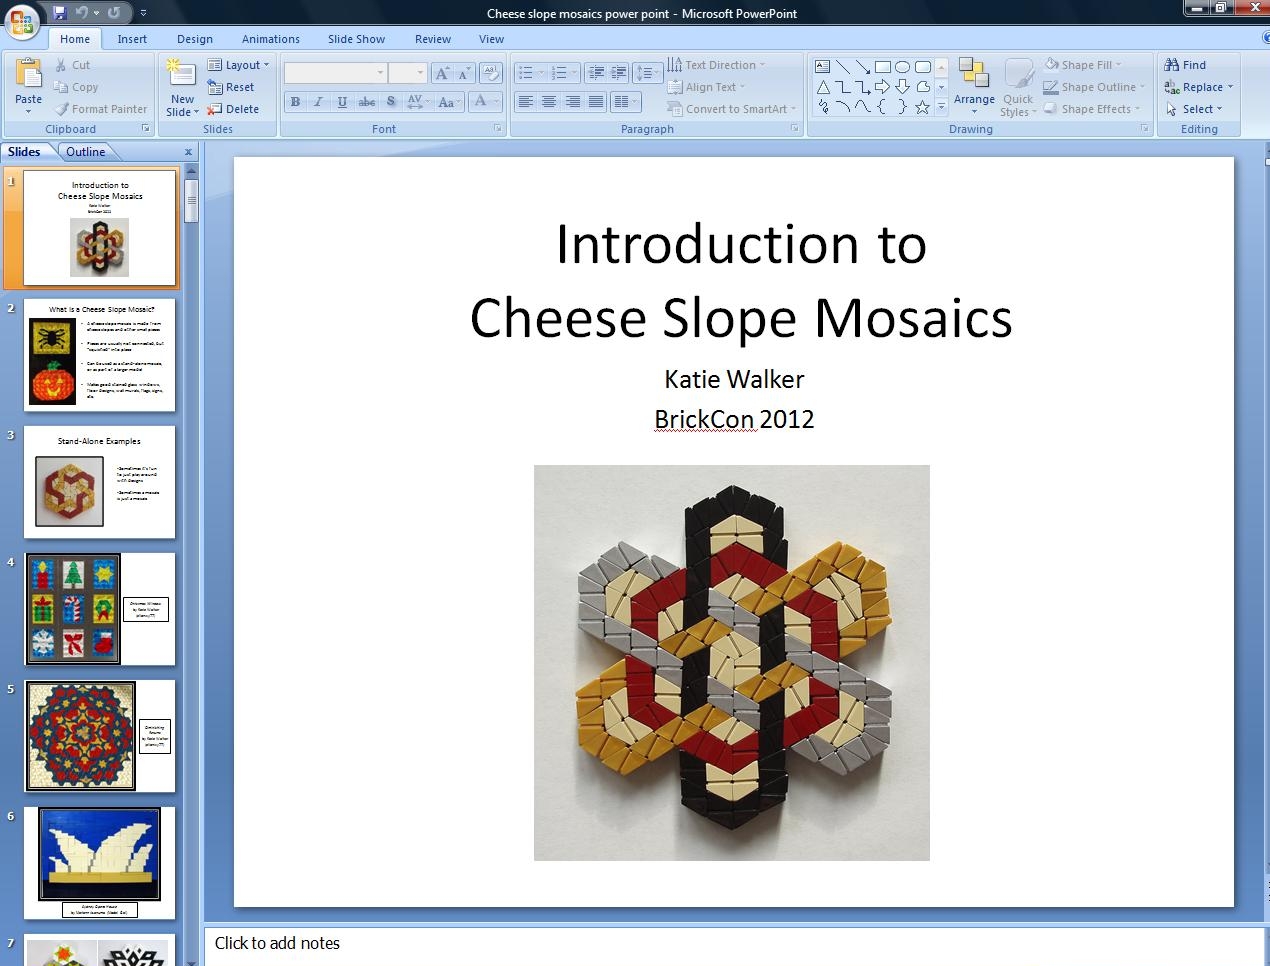 Screenshot of Microsoft PowerPoint editor. Slide has a white background and black text that says "Introduction to Cheese Slope Mosaics Katie Walker BrickCon 2012". Slide has an image of a white, grey, black, and red mosaic making a six pronged star.